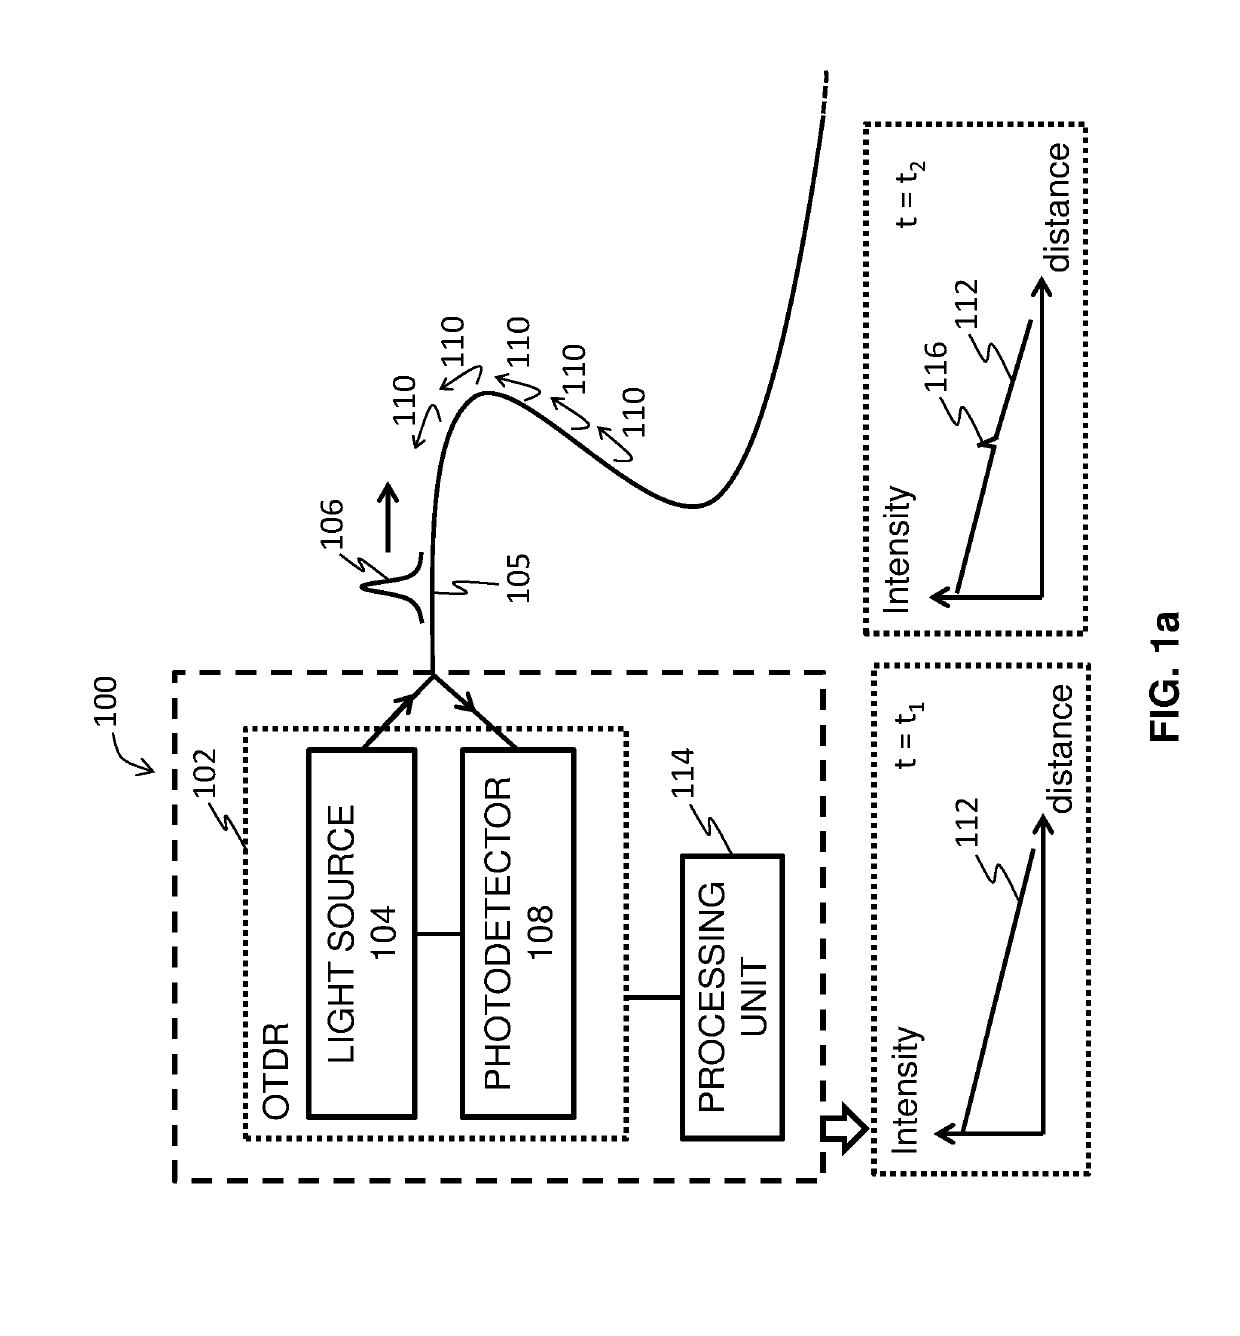 Method and system for distributed acoustic sensing